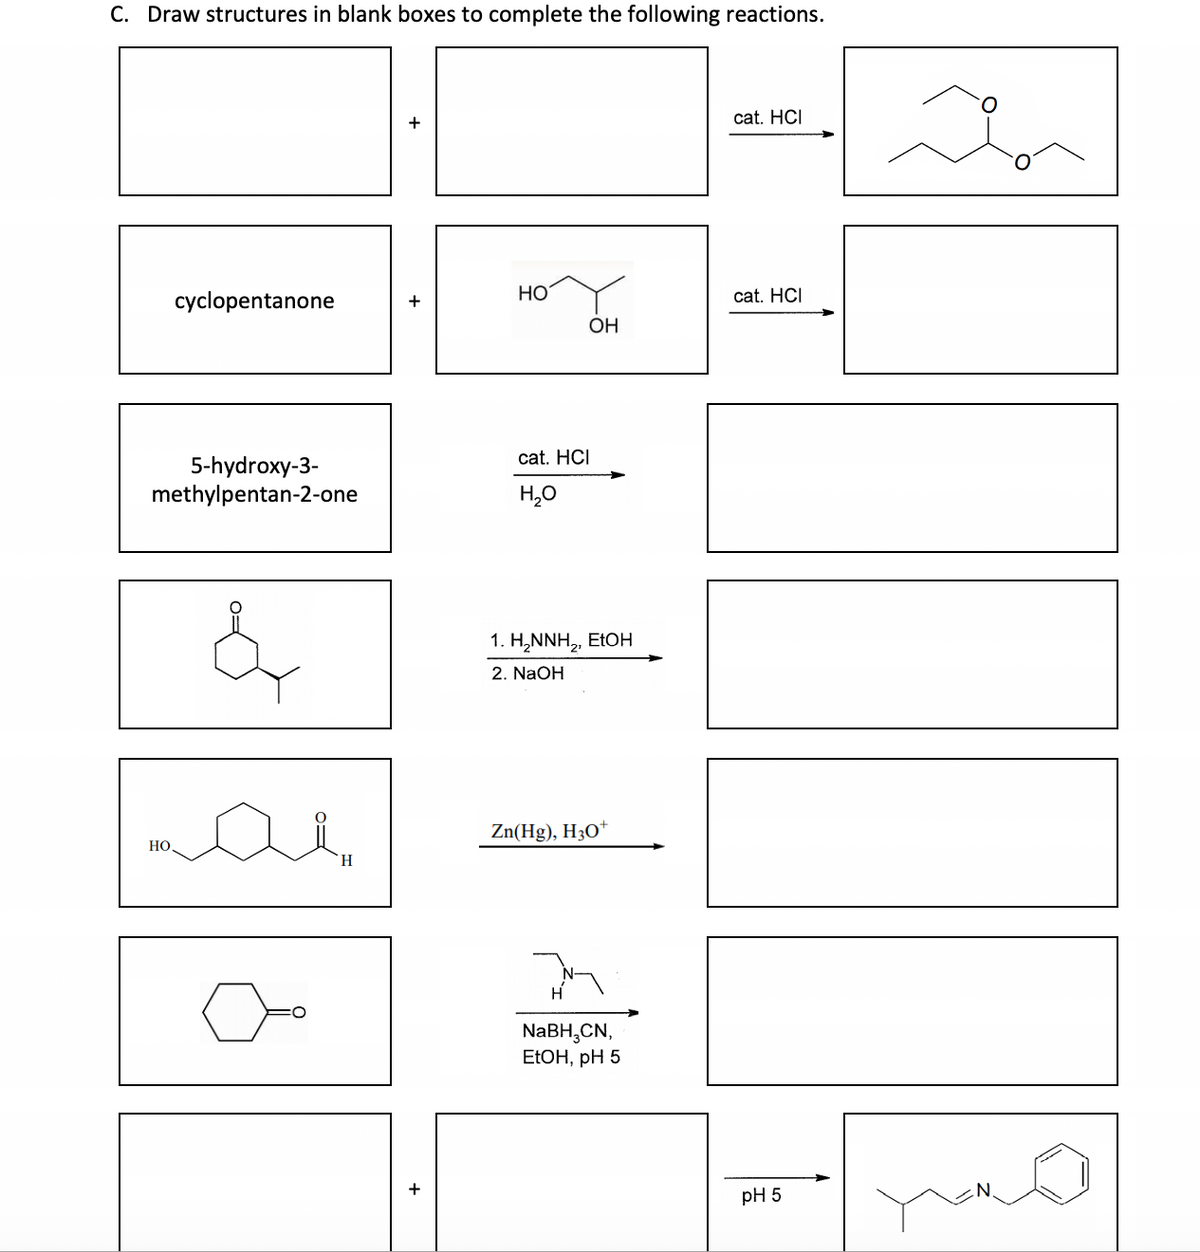 C. Draw structures in blank boxes to complete the following reactions.
cyclopentanone
5-hydroxy-3-
methylpentan-2-one
&
HO
H
HO
OH
cat. HCI
H₂O
1. H₂NNH₂, EtOH
2. NaOH
Zn(Hg), H3O+
NaBH3CN,
EtOH, pH 5
cat. HCI
cat. HCI
pH 5